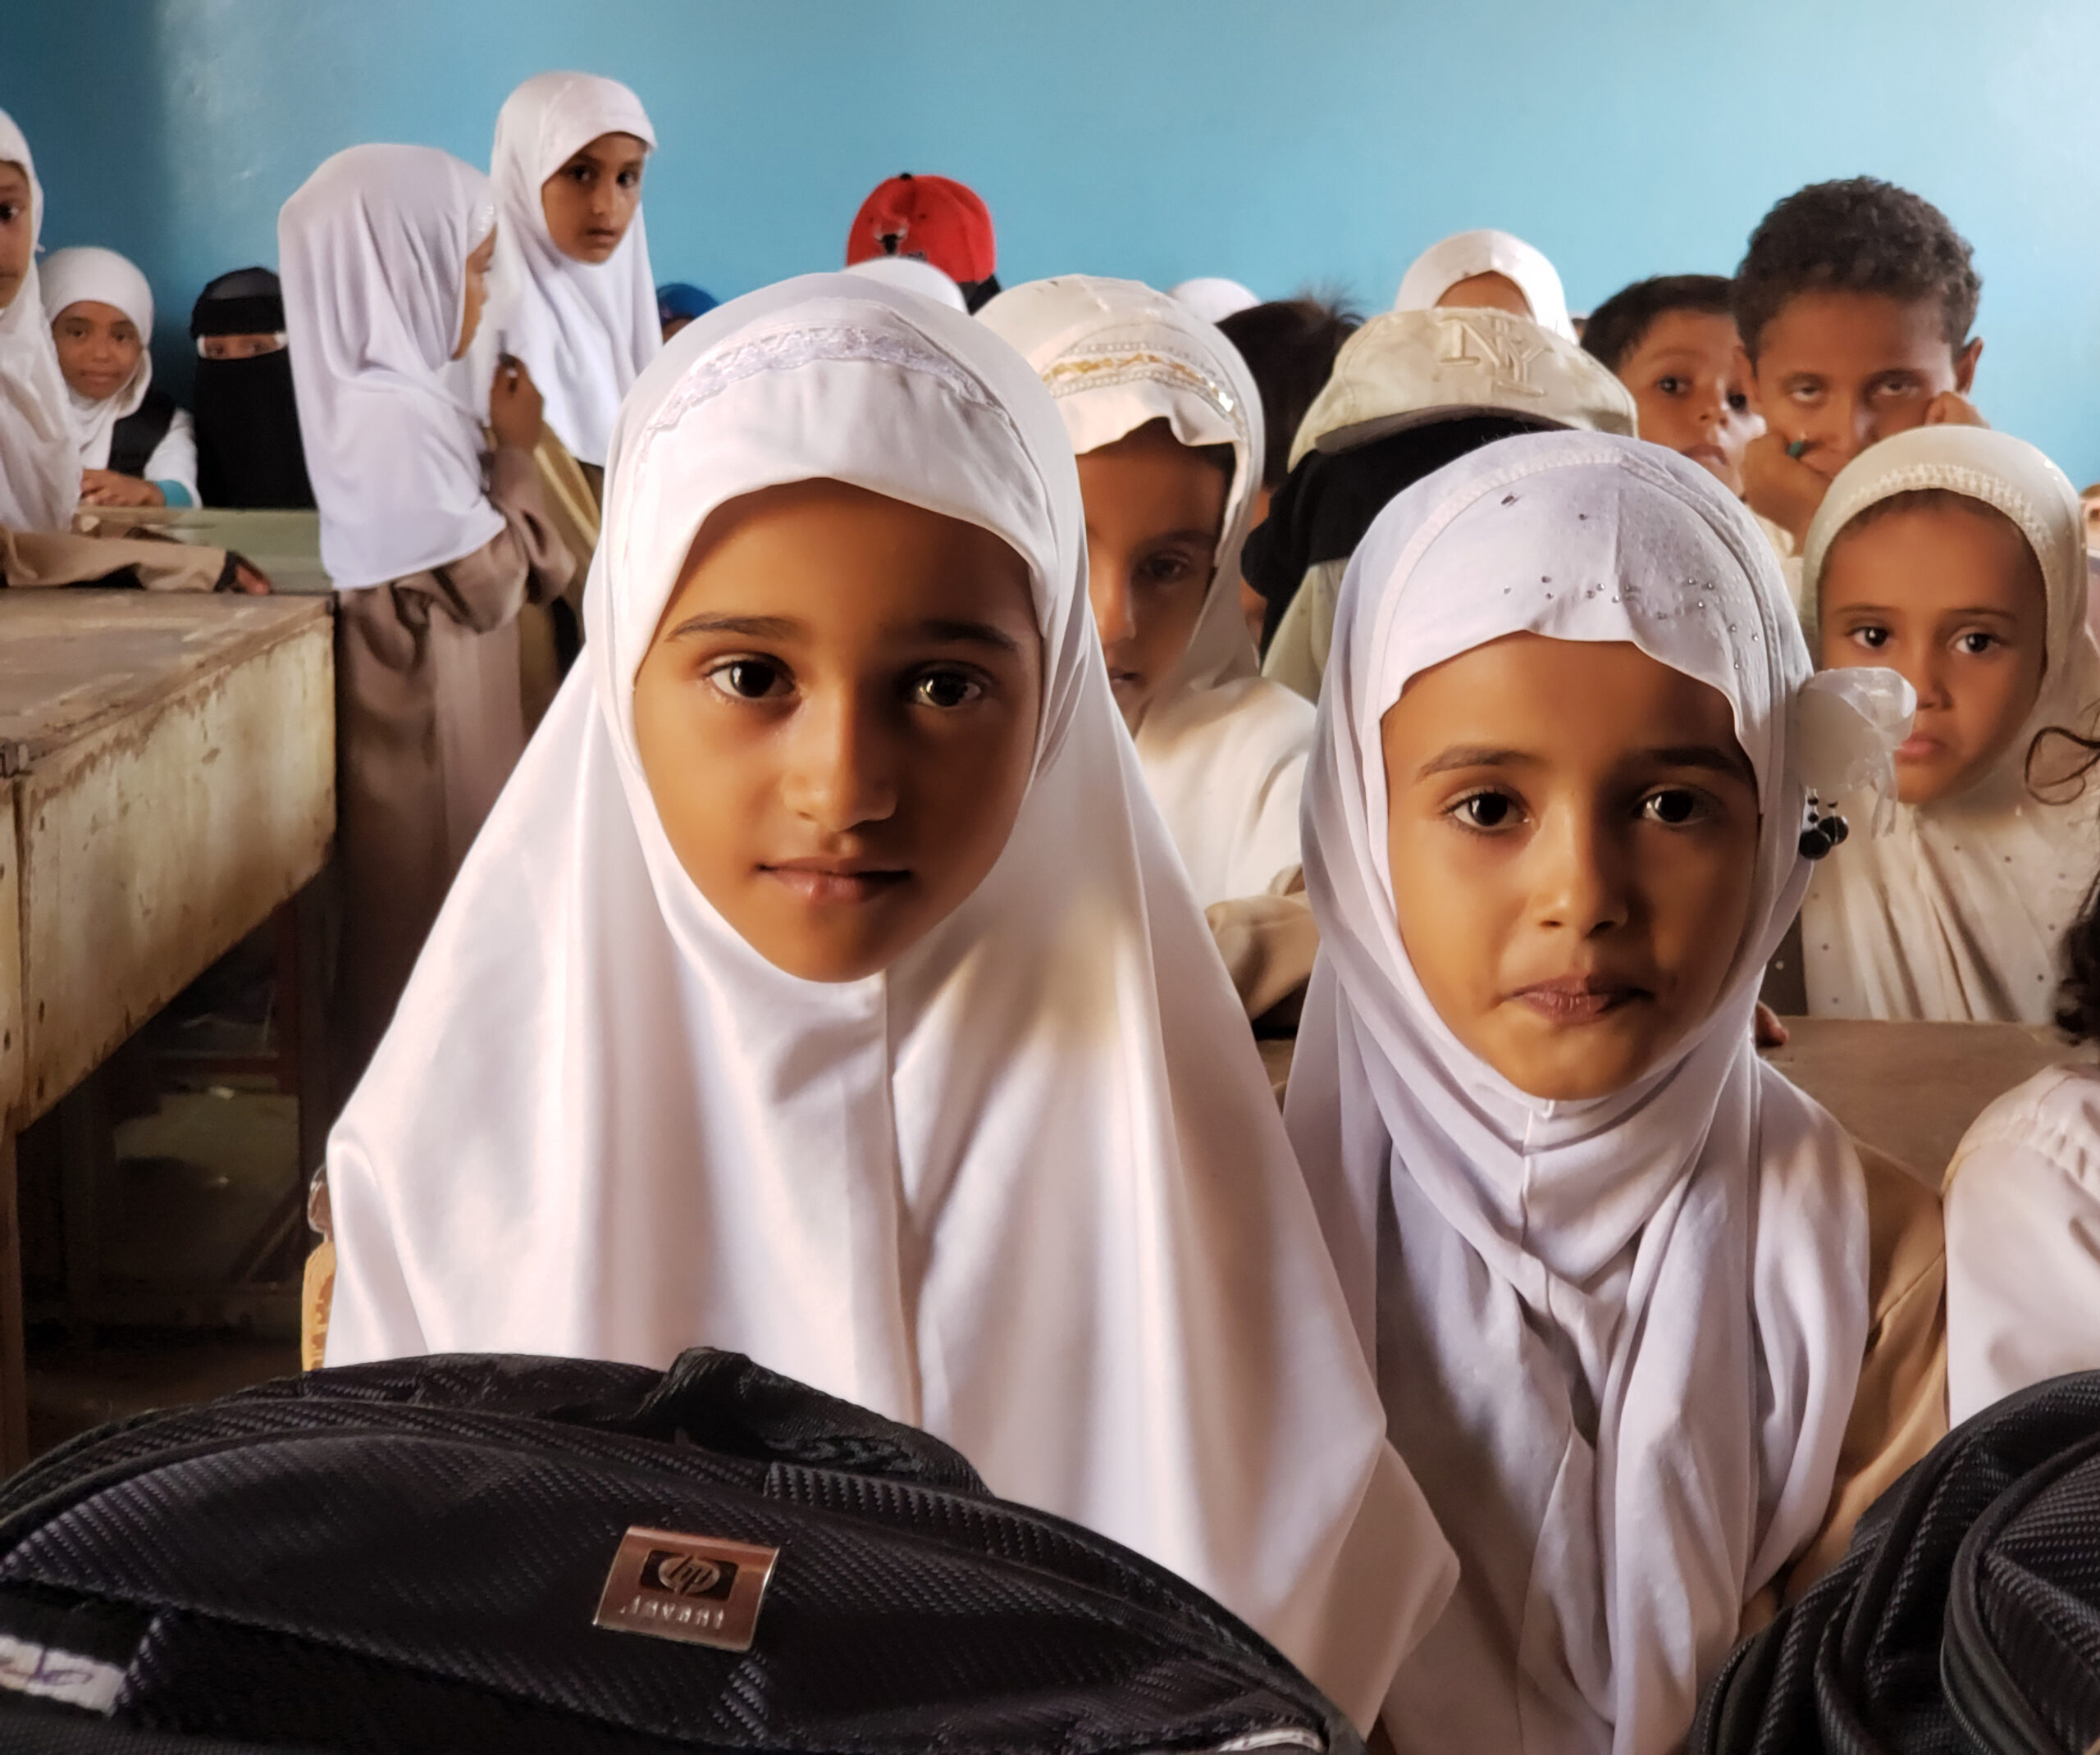 Two beatiful girls with wearing white headscarves sitting in class with other kids